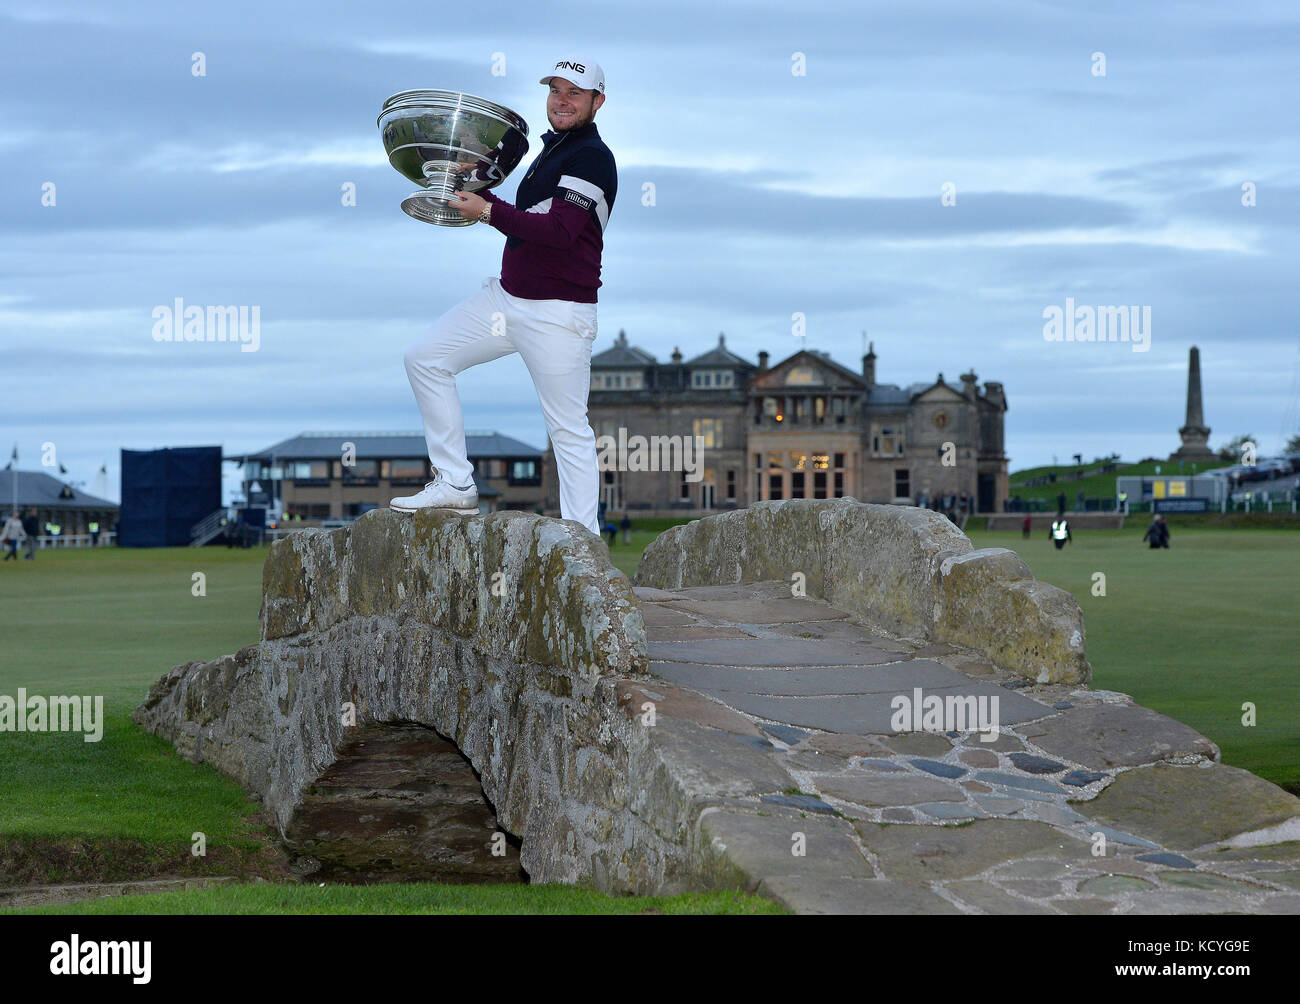 England's Tyrrell Hatton poses with the trophy on the Swilken bridge after winning during day four of the Alfred Dunhill Links Championship at St Andrews Old Course, Fife. Stock Photo